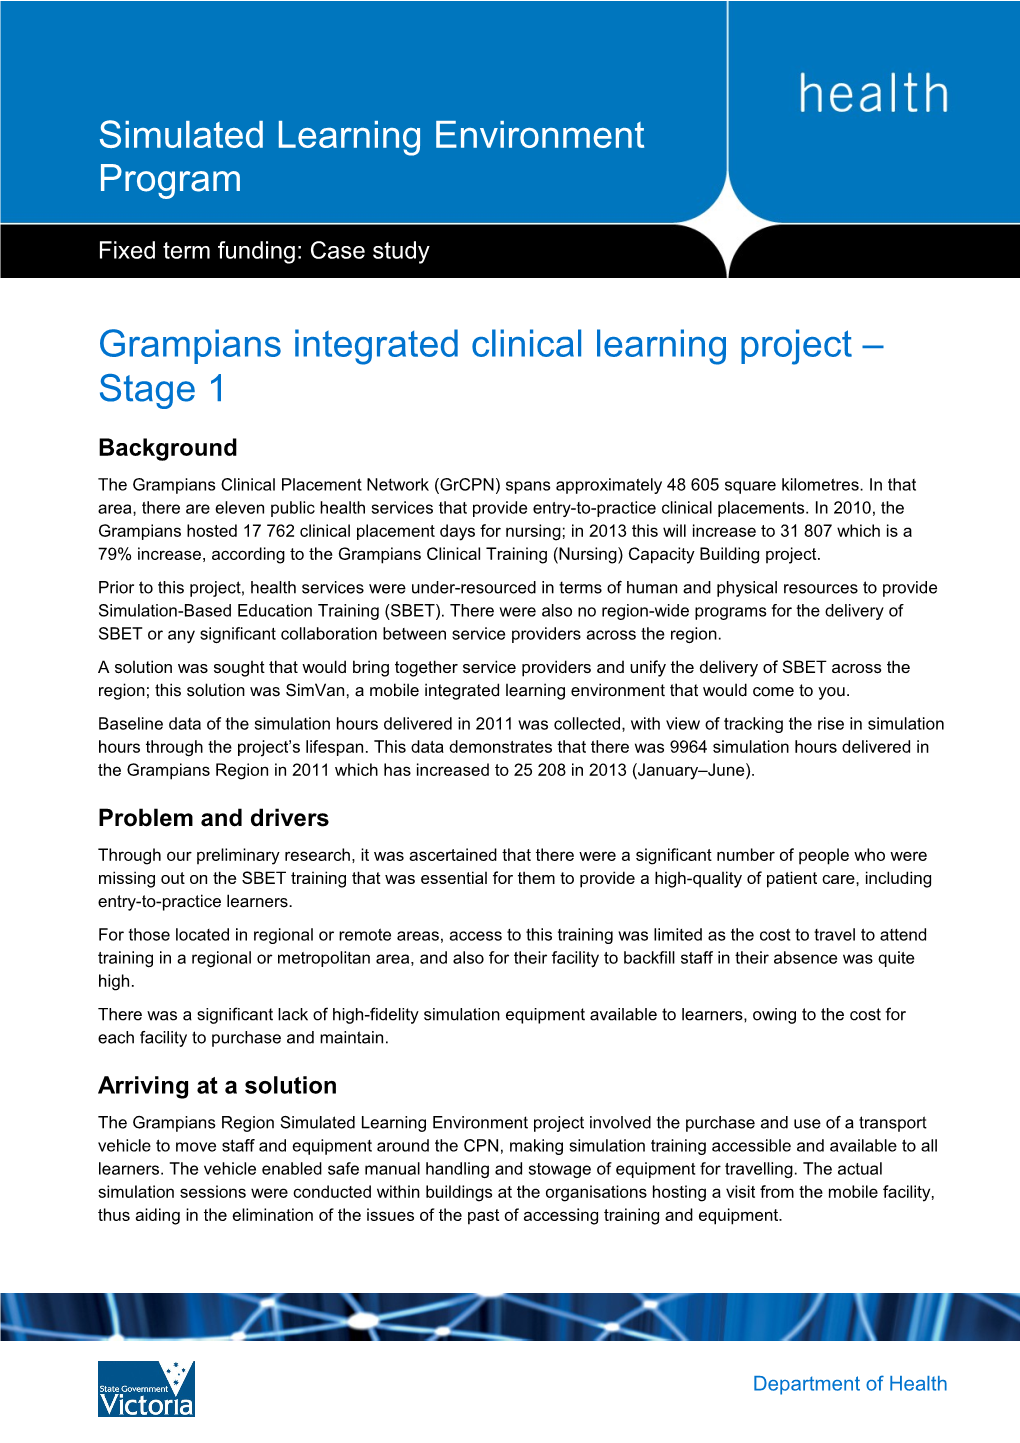 Grampians Integrated Clinical Learning Project Stage 1